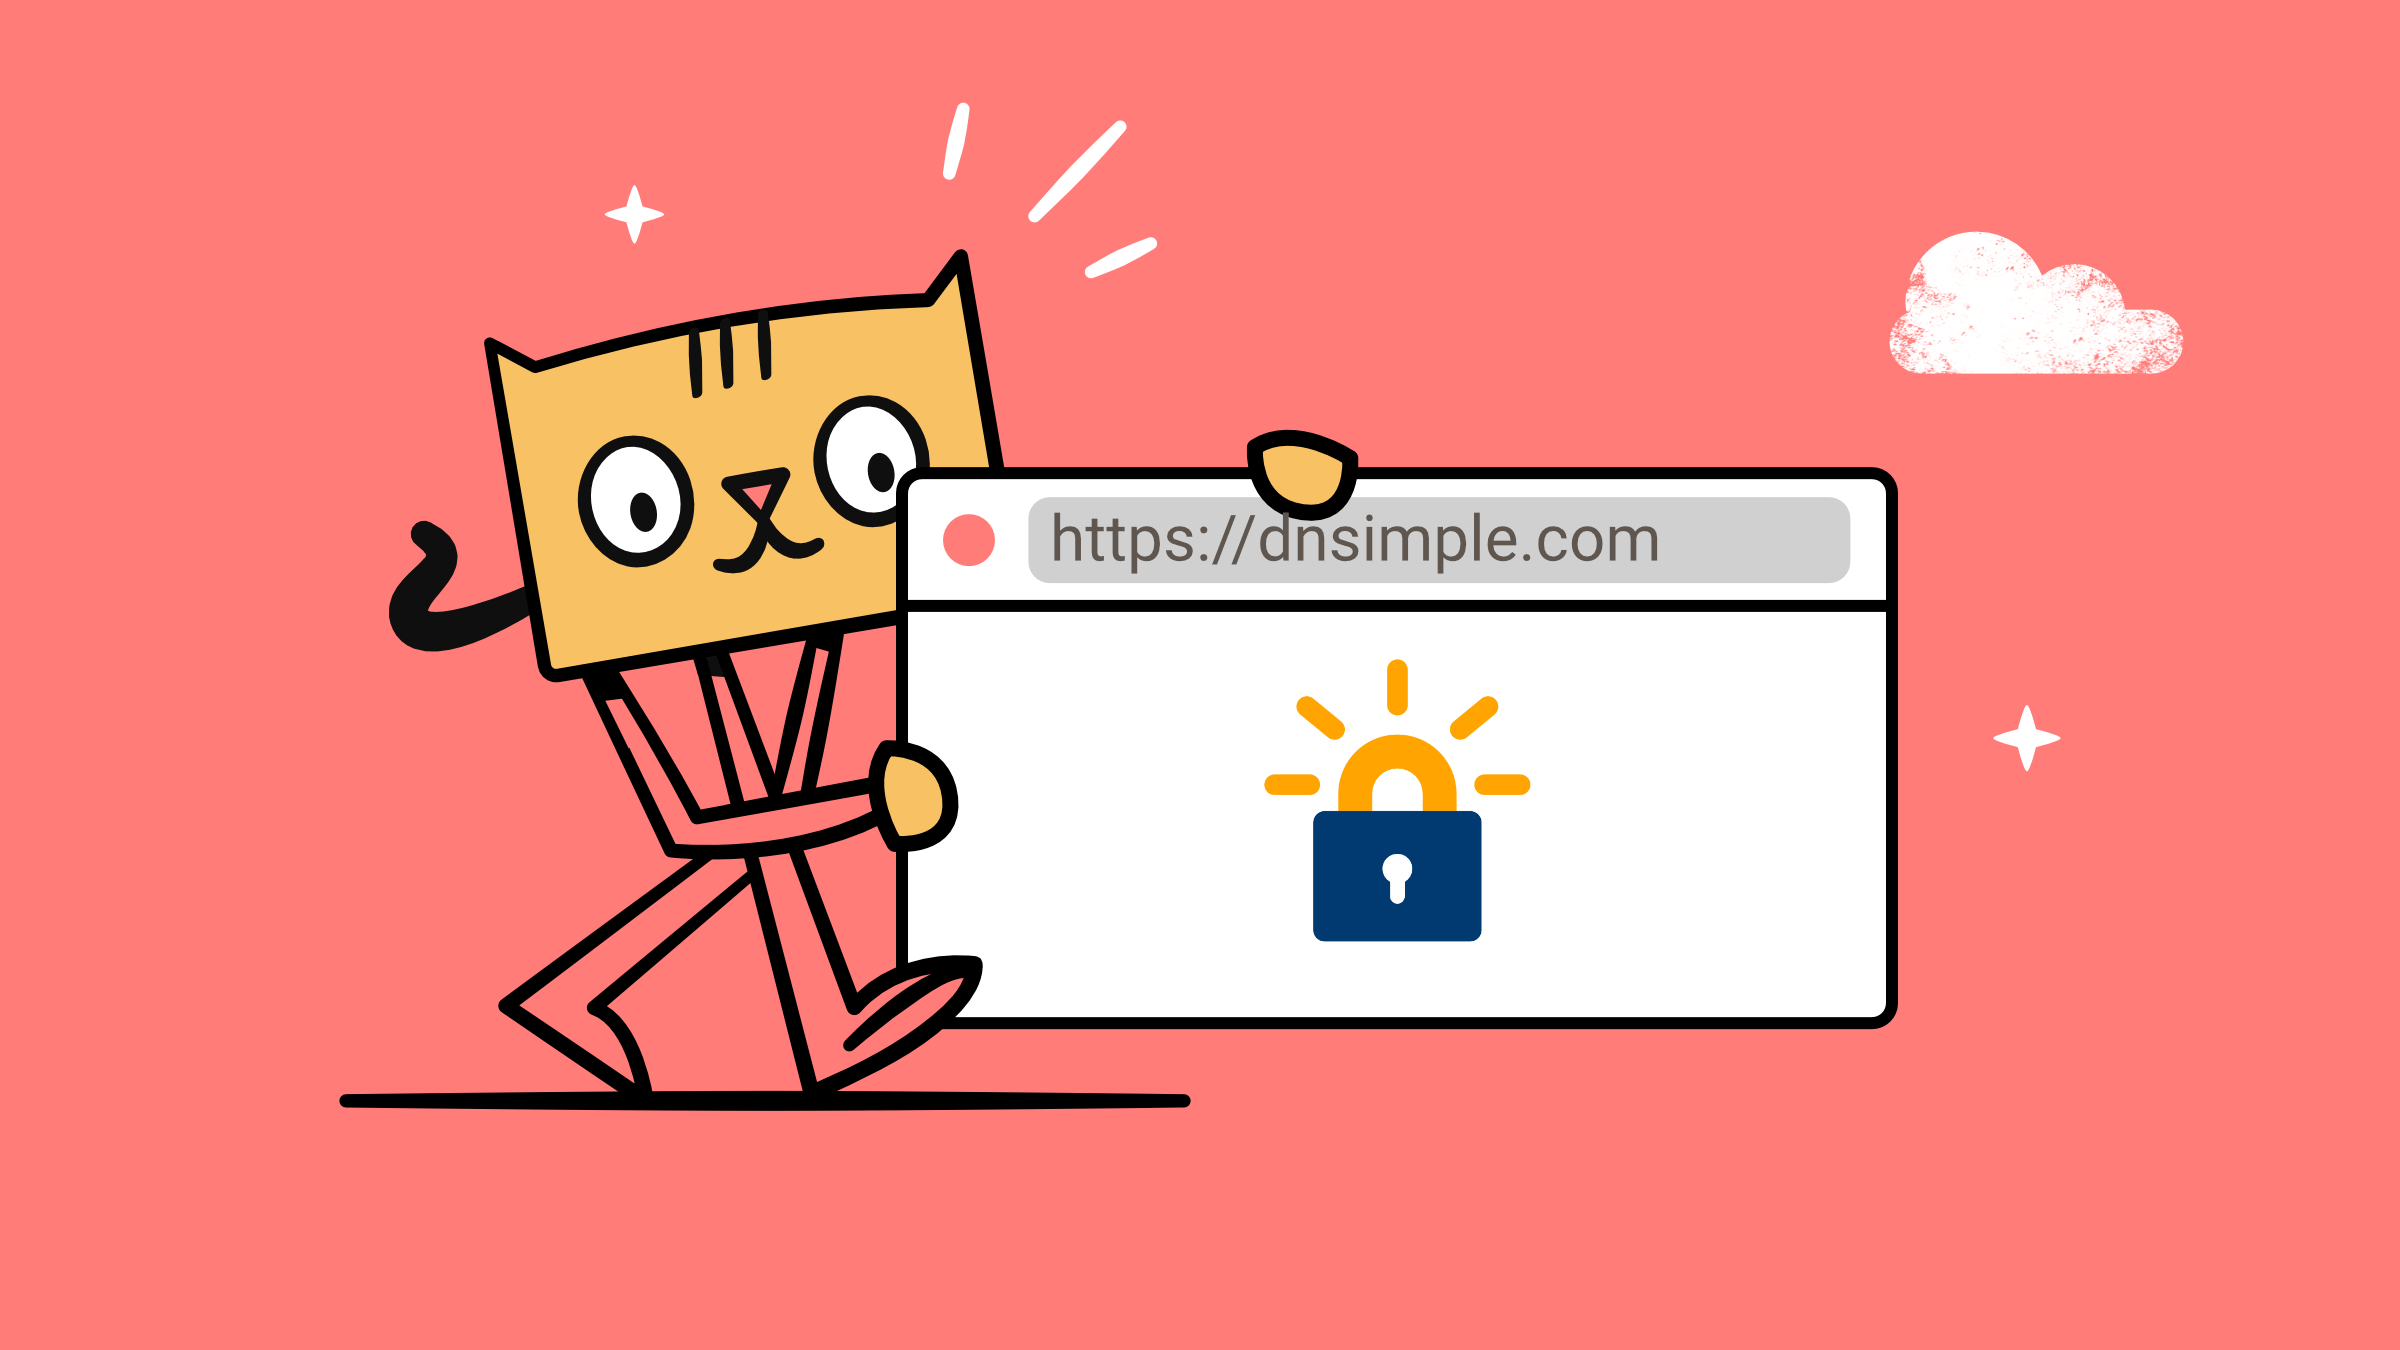 A cartoon image of a cat holding a web browser